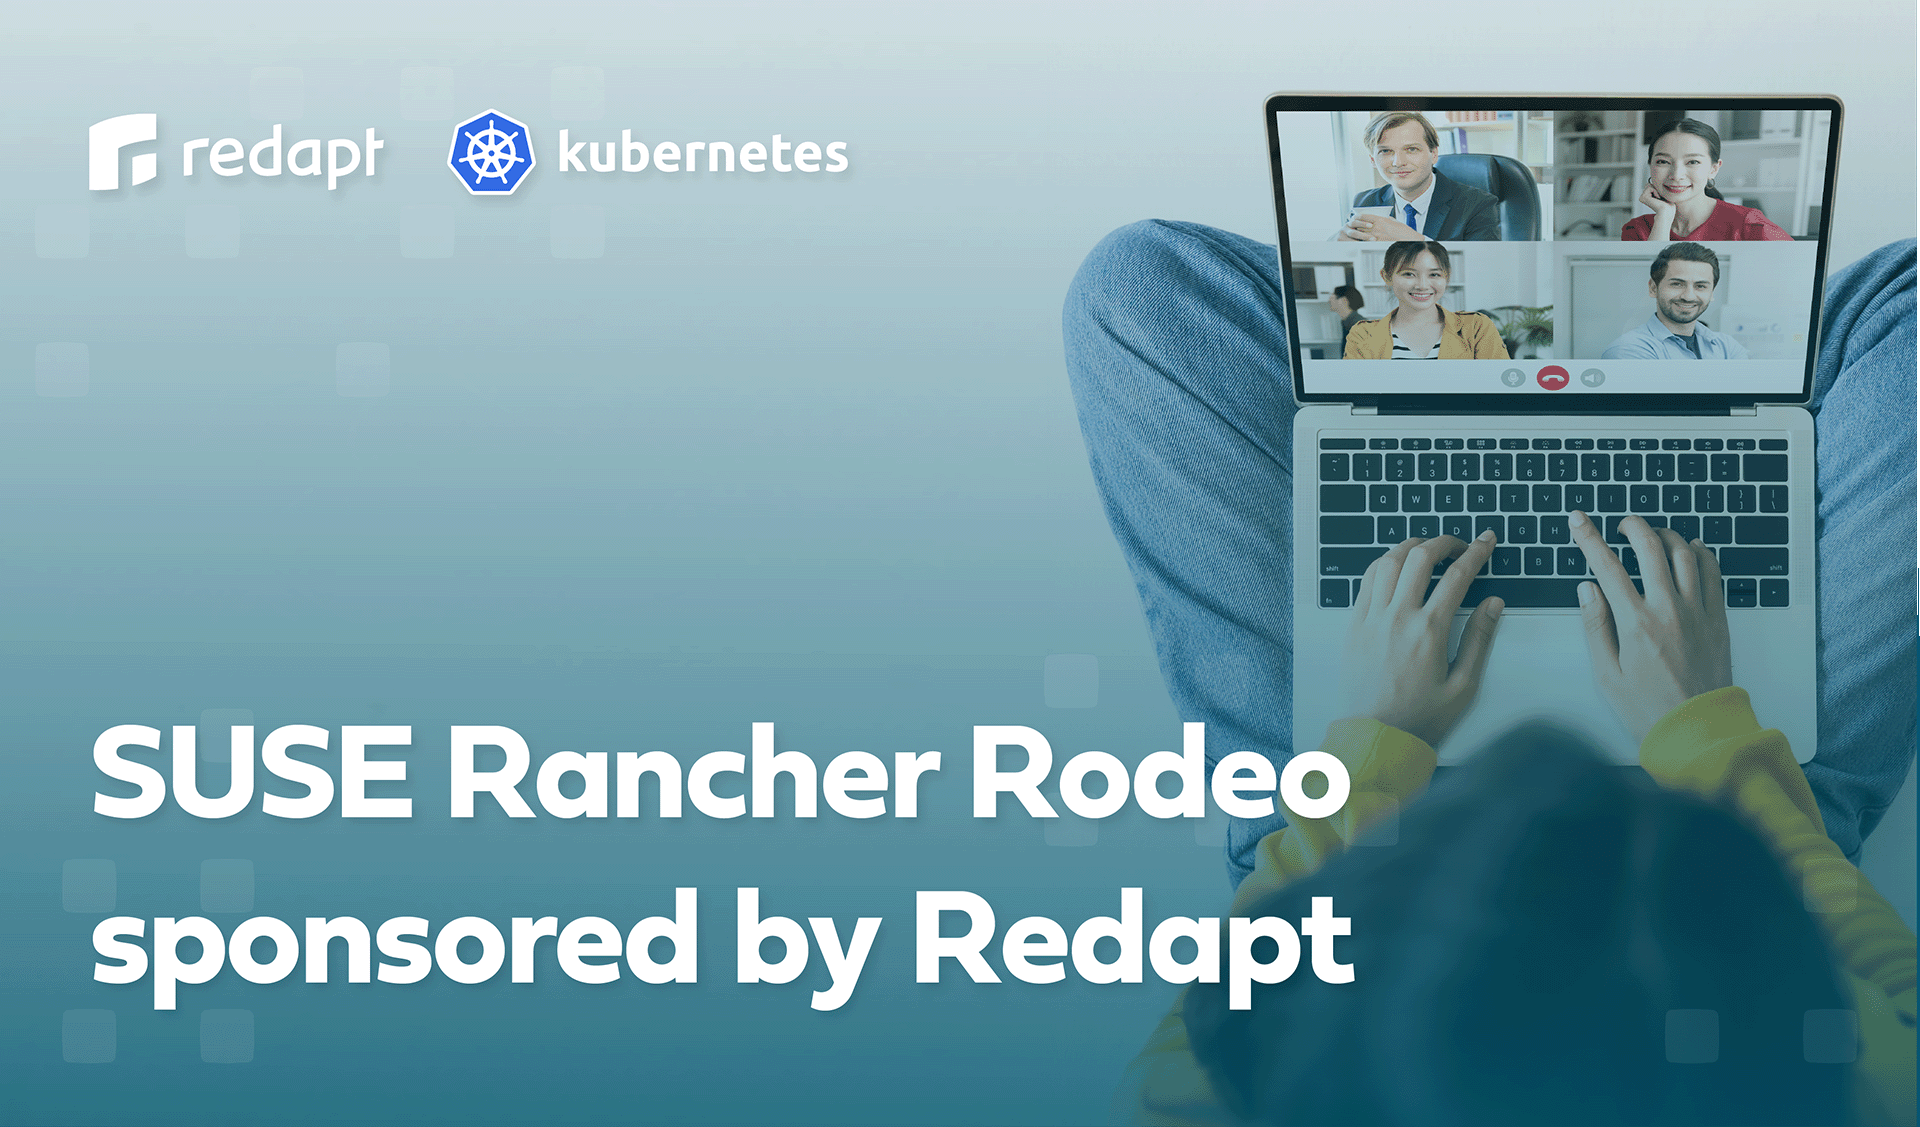 Redapt at SUSE Rancher Rodeo: Hands-On Kubernetes and Rancher Workshop